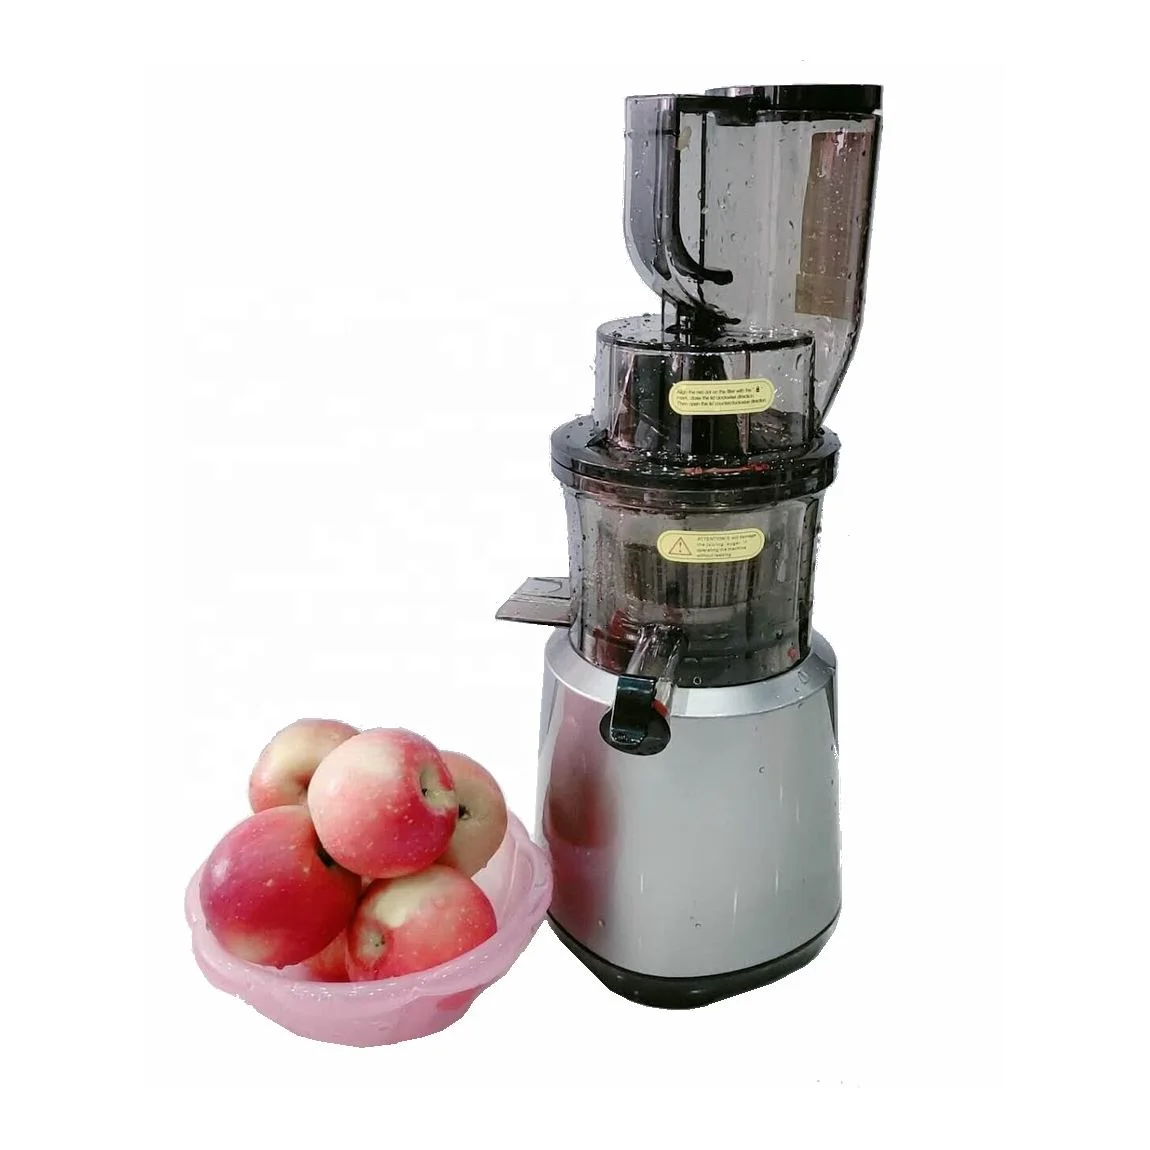 Hot selling juicer extractor machine orange juicer slow cold press juicer compact size lower noise big mouth